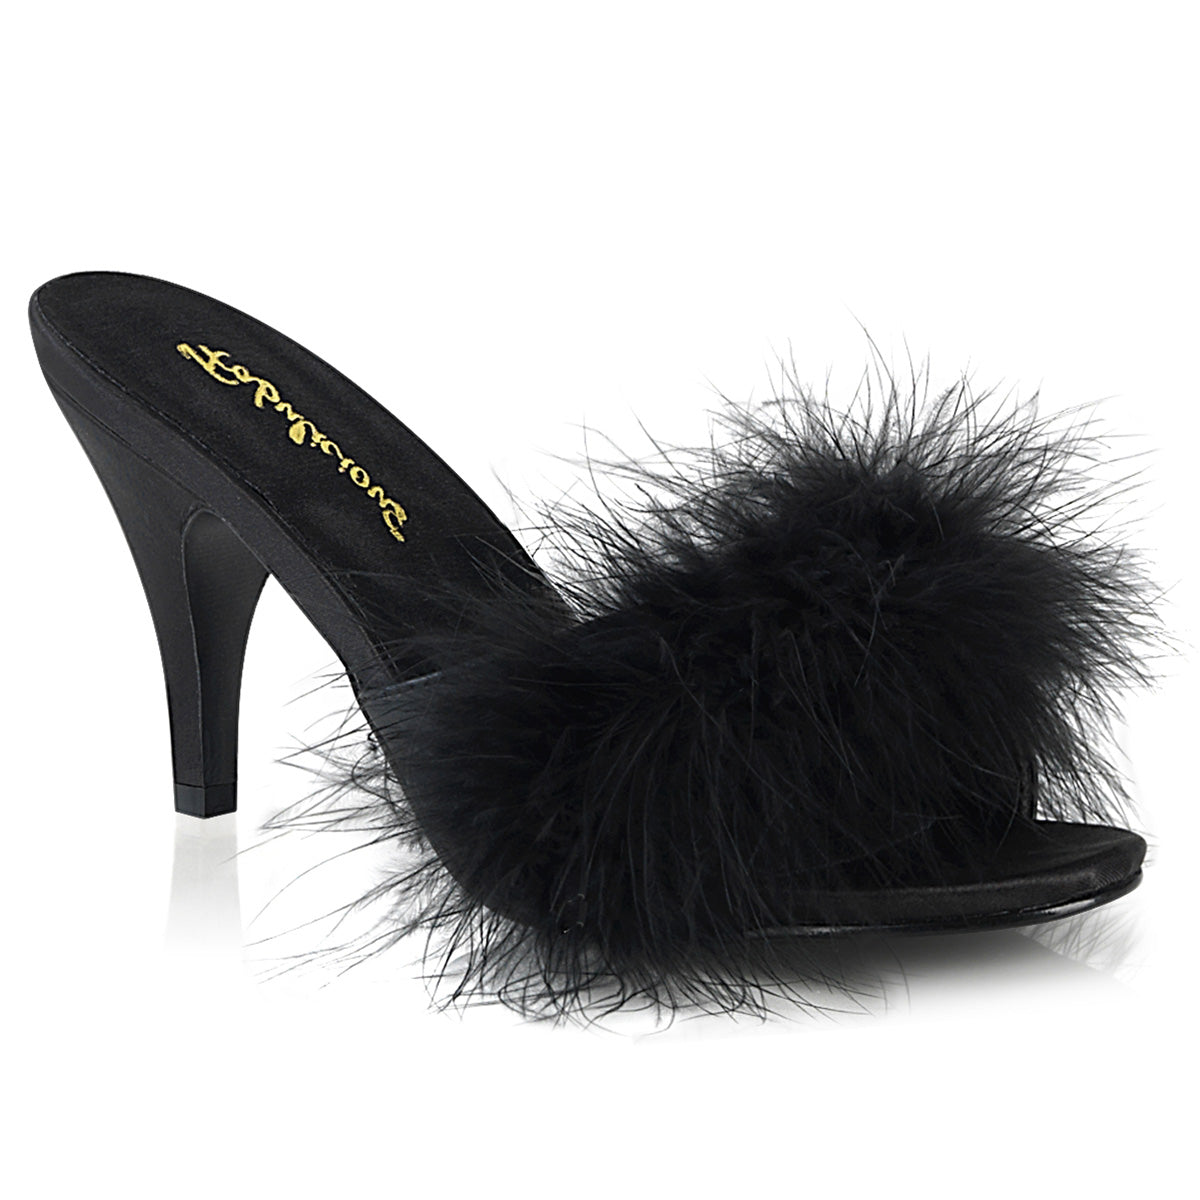 AMOUR-03 Fabulicious 3 Inch Heel Black Marabou Sexy Shoes-Fabulicious- Sexy Shoes